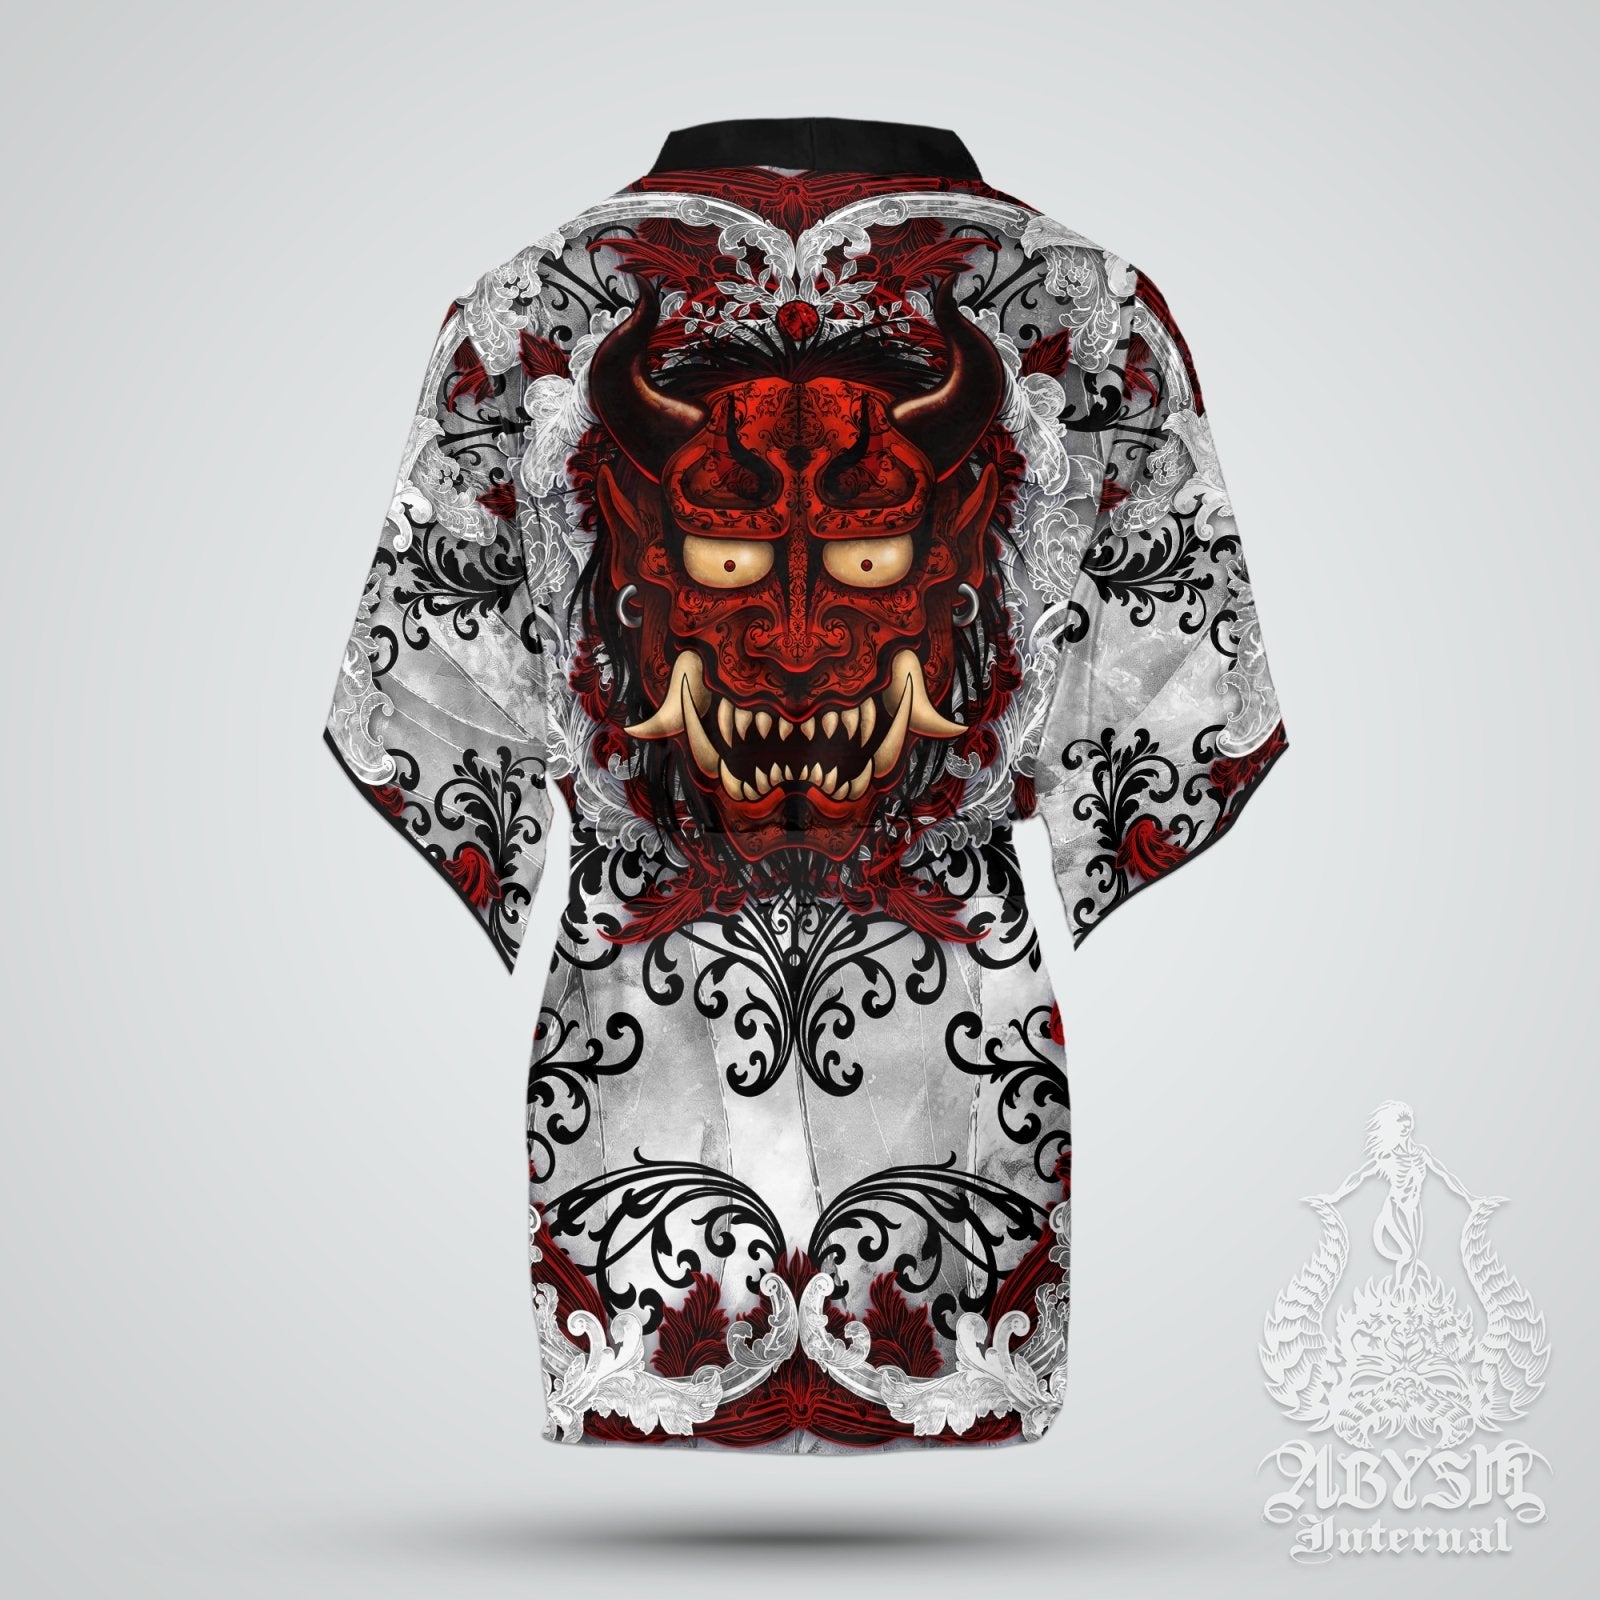 Demon Cover Up, Beach Outfit, Oni Party Kimono, Japanese Summer Festival Robe, Indie and Alternative Clothing, Unisex - Bloody White Goth - Abysm Internal